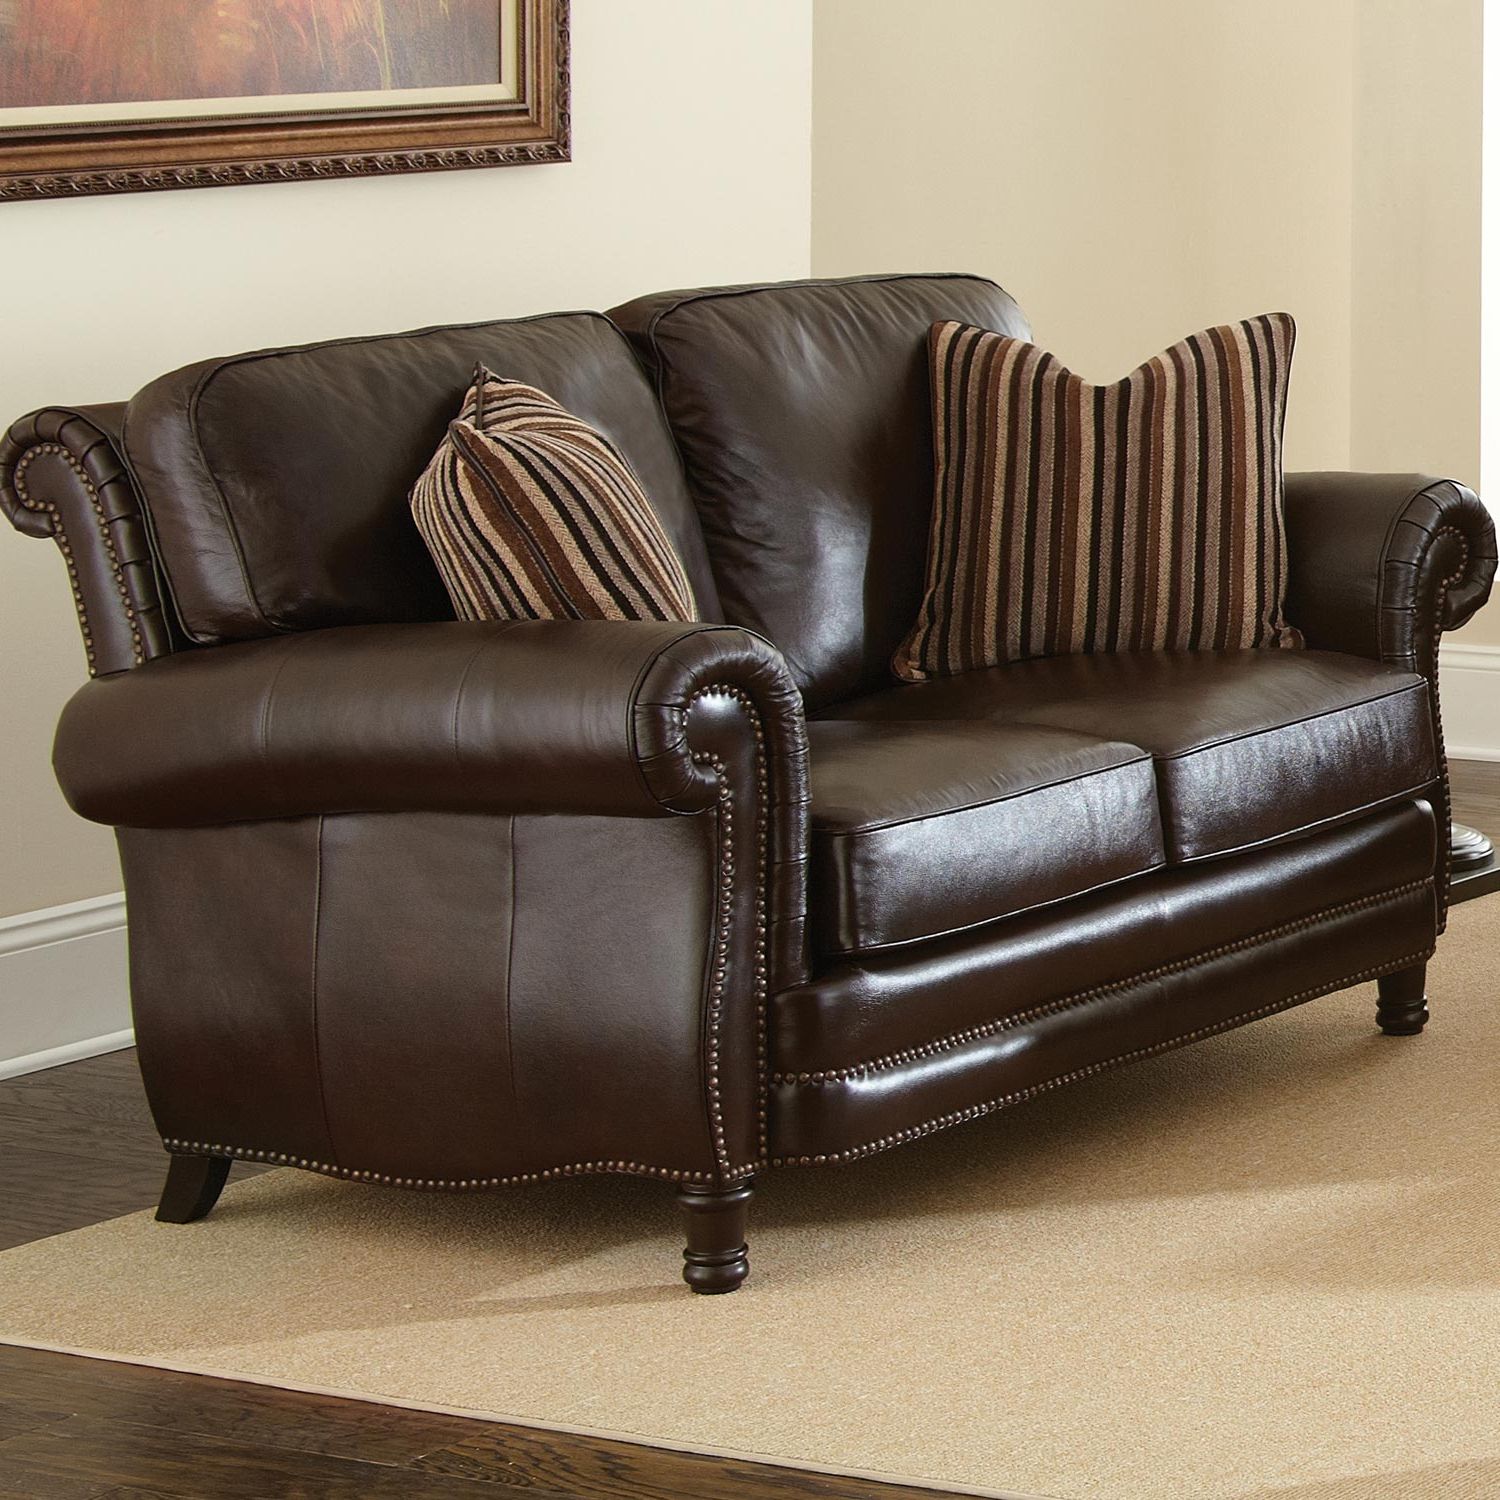 Chateau 3 Piece Leather Sofa Set – Antique Chocolate Brown | Dcg Stores Intended For Faux Leather Sofas In Chocolate Brown (View 10 of 20)